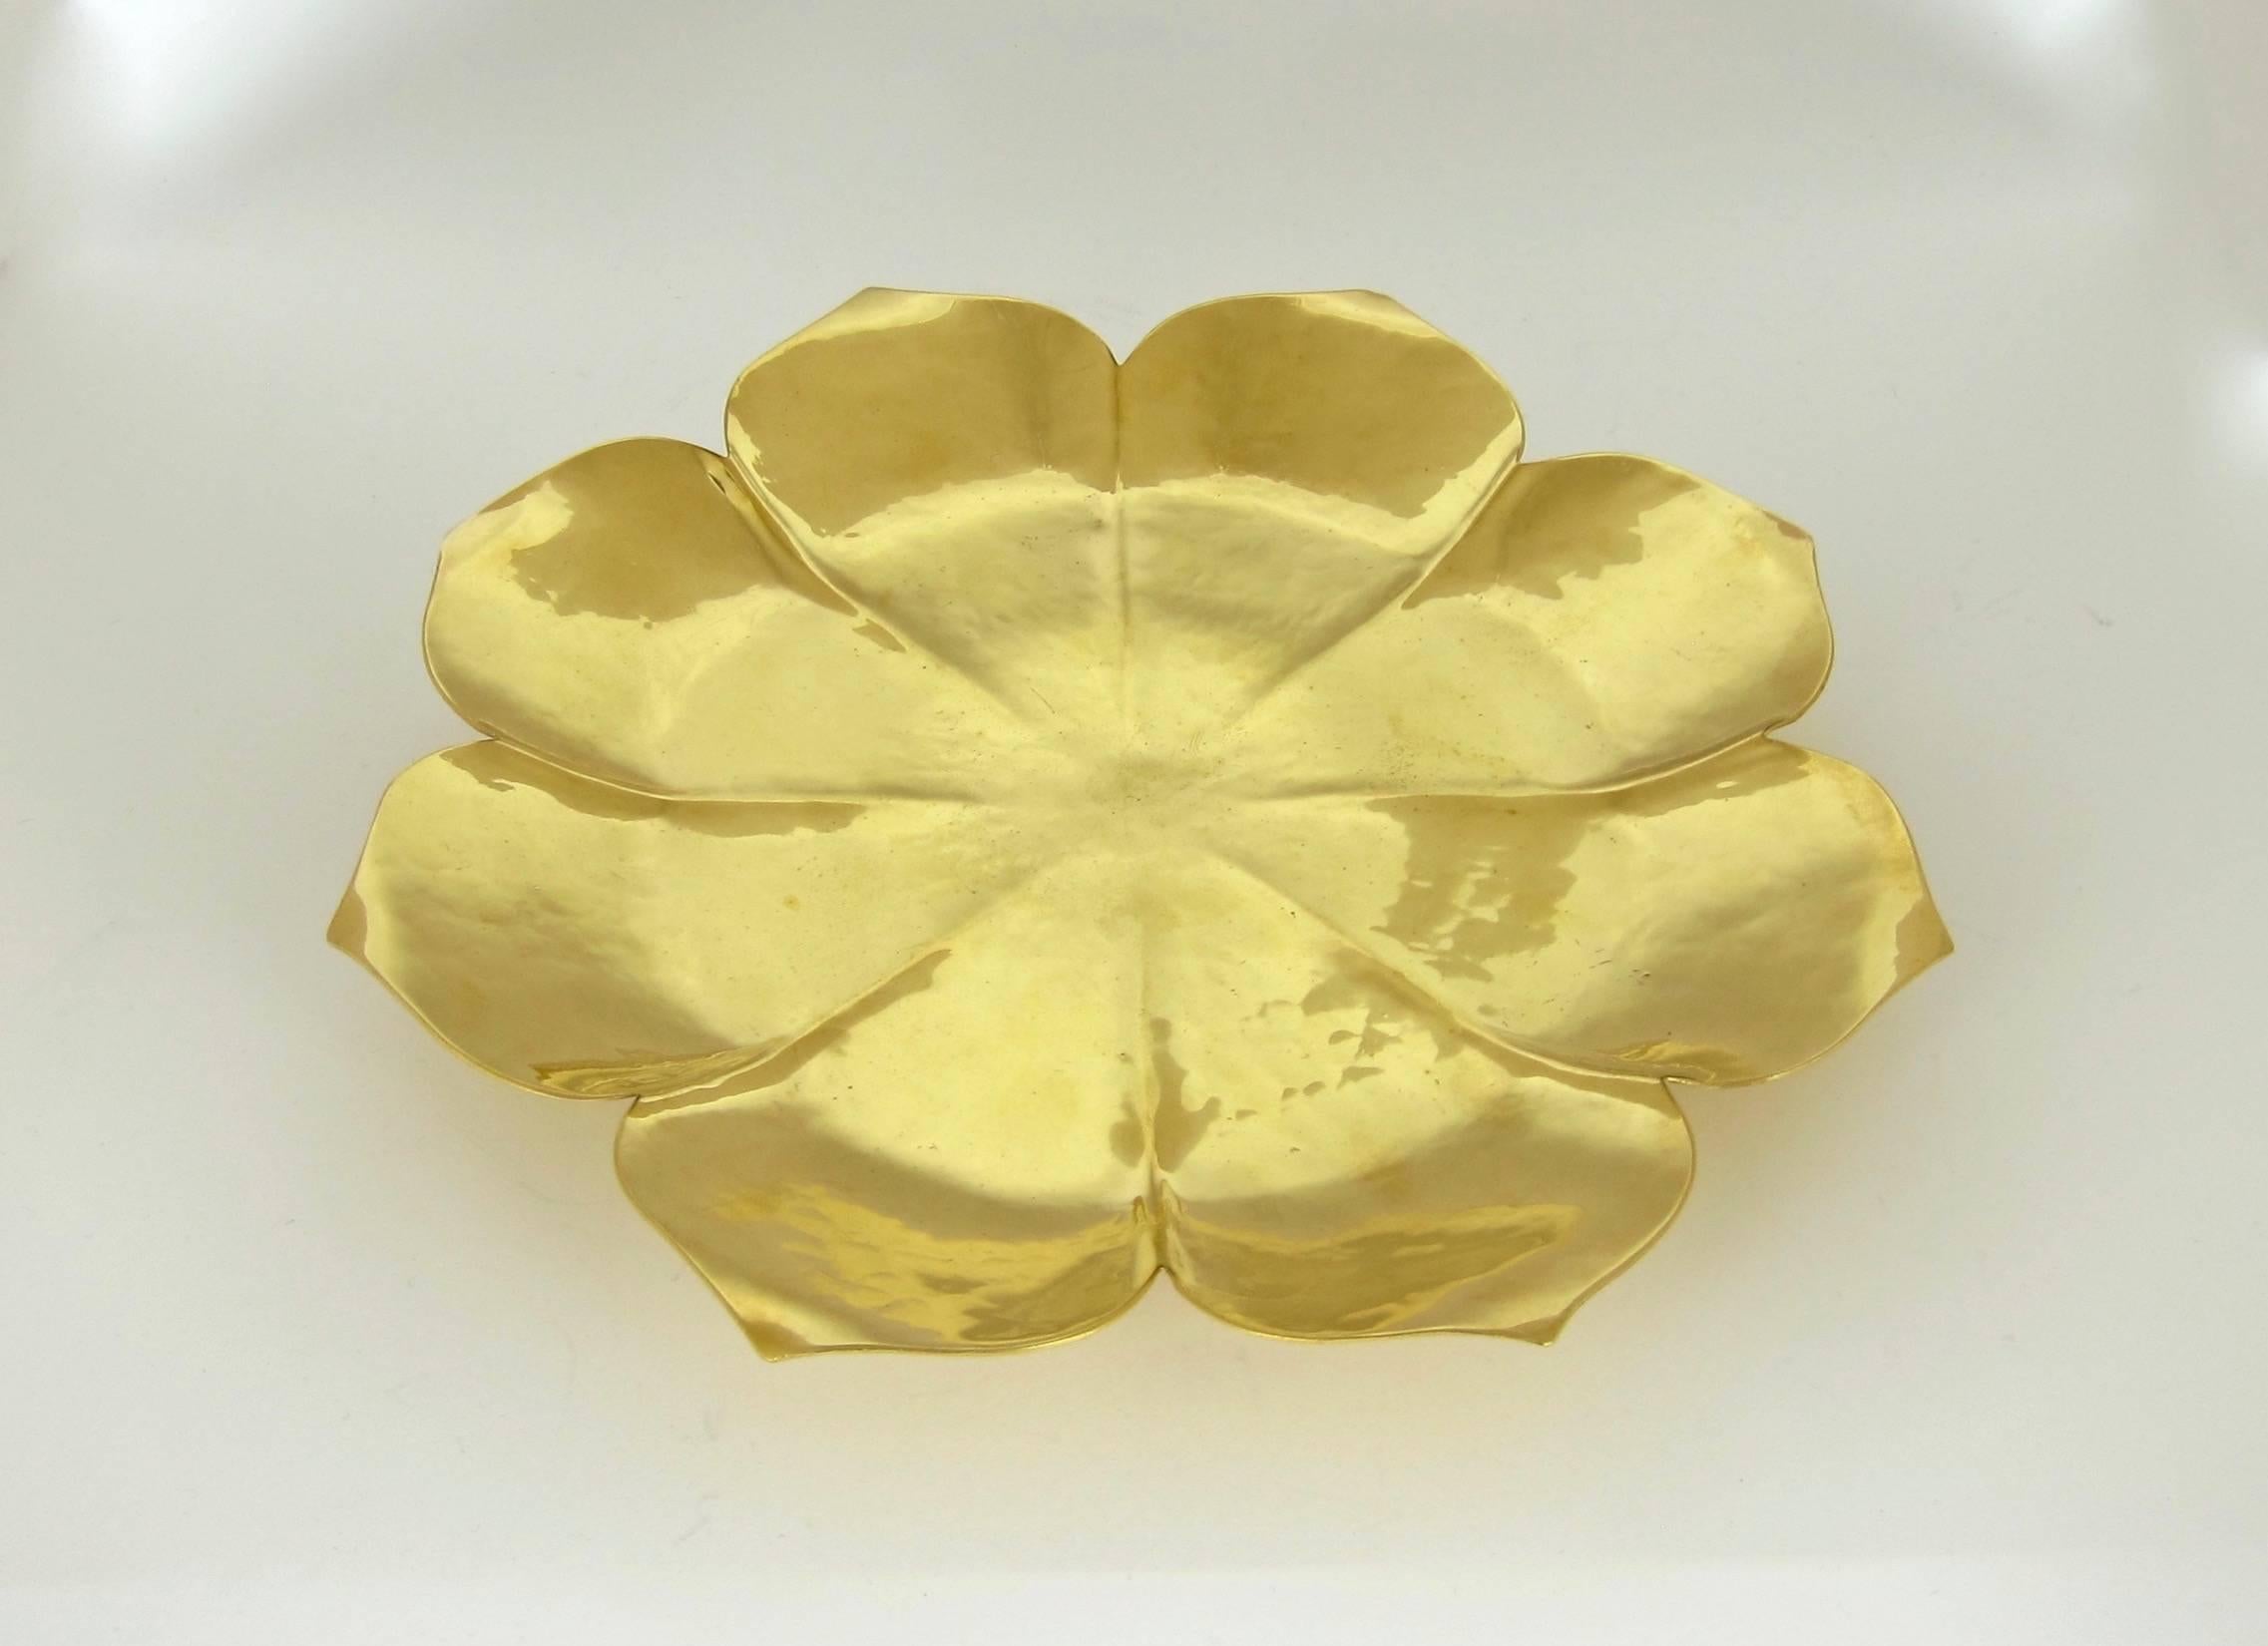 An Art Deco-era gilt lotus flower form dish on a ring foot by Marie Zimmermann (1879-1972). The design is an abstracted lotus blossom composed of eight petals with pointed tips and comes directly from the artist's estate.

The substantial art metal